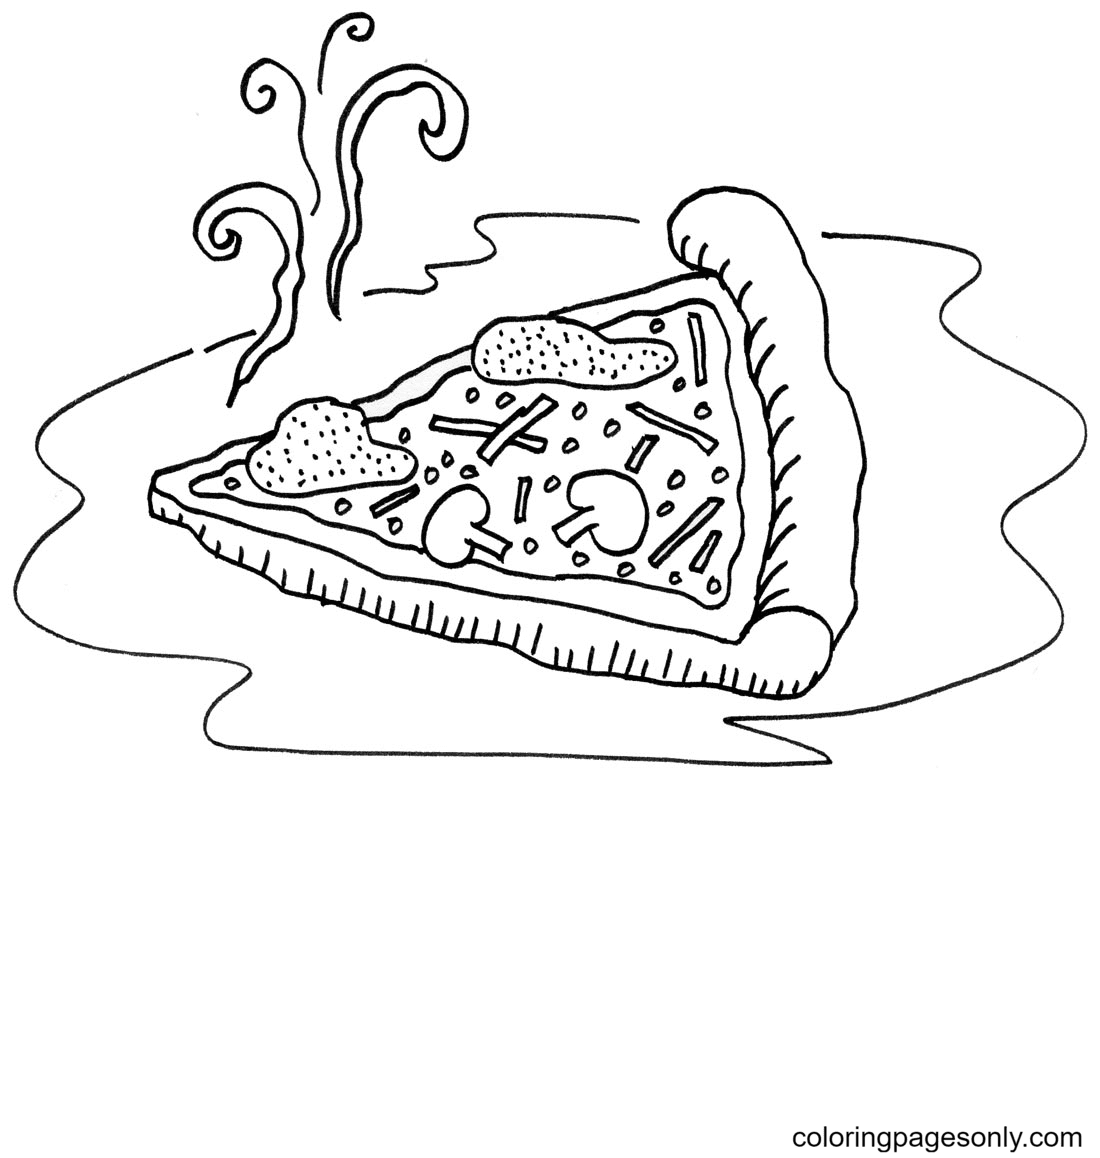 A freshly-baked Slices of Pizza Coloring Pages